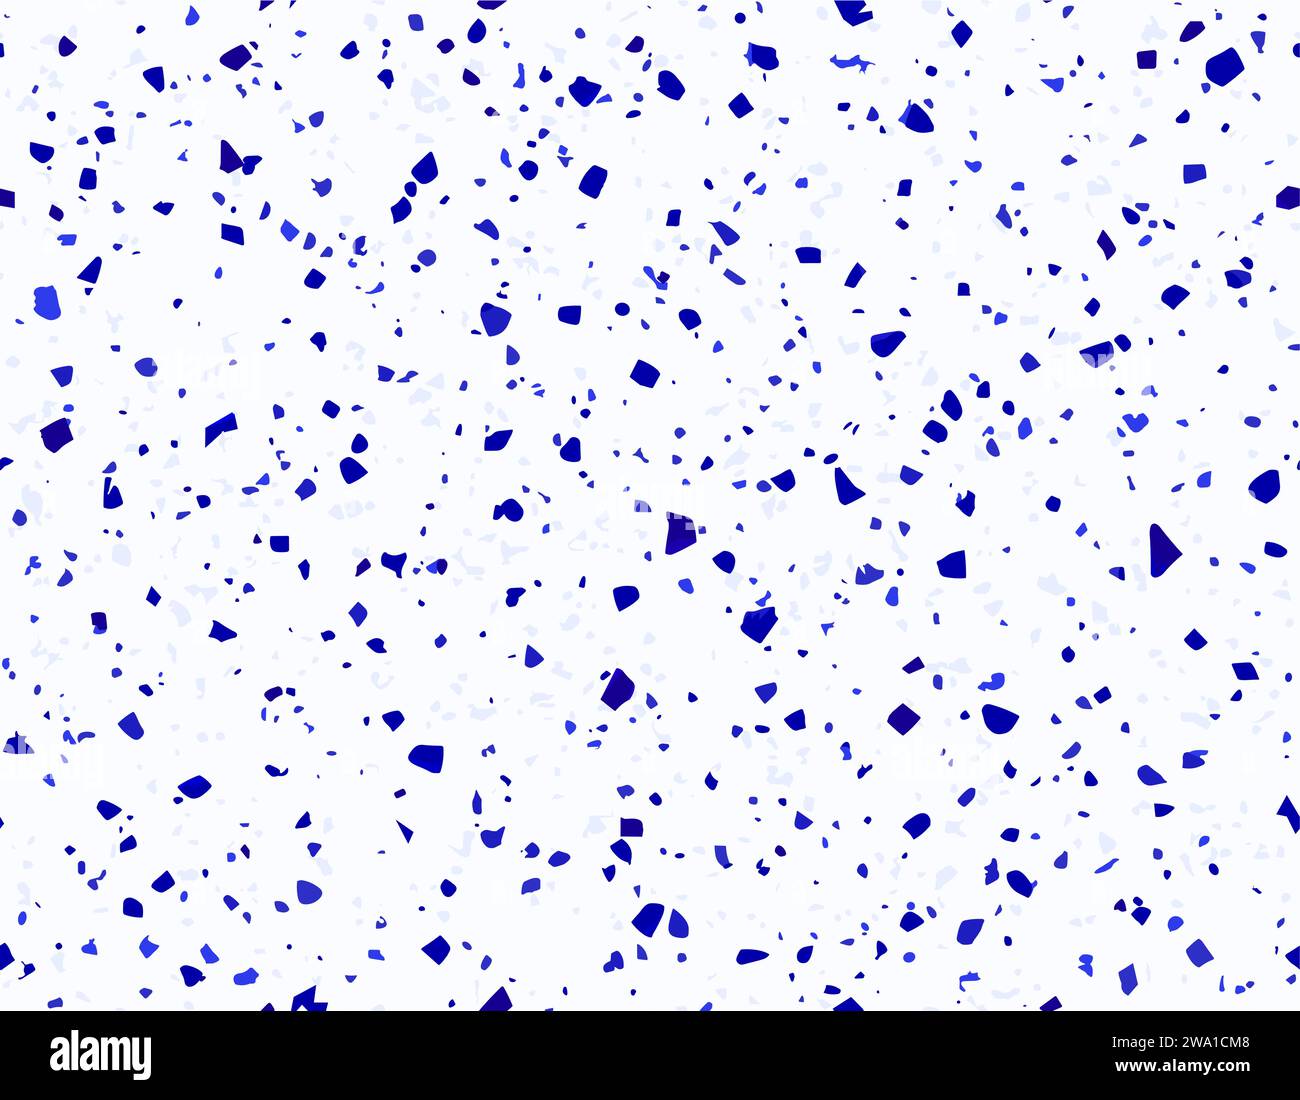 Blue and white terrazzo ceramic tile pattern of light blue terazo mosaic stones, vector background. Terazzo marble floor texture or terrazo floor, seamless pattern background of abstract color stones Stock Vector